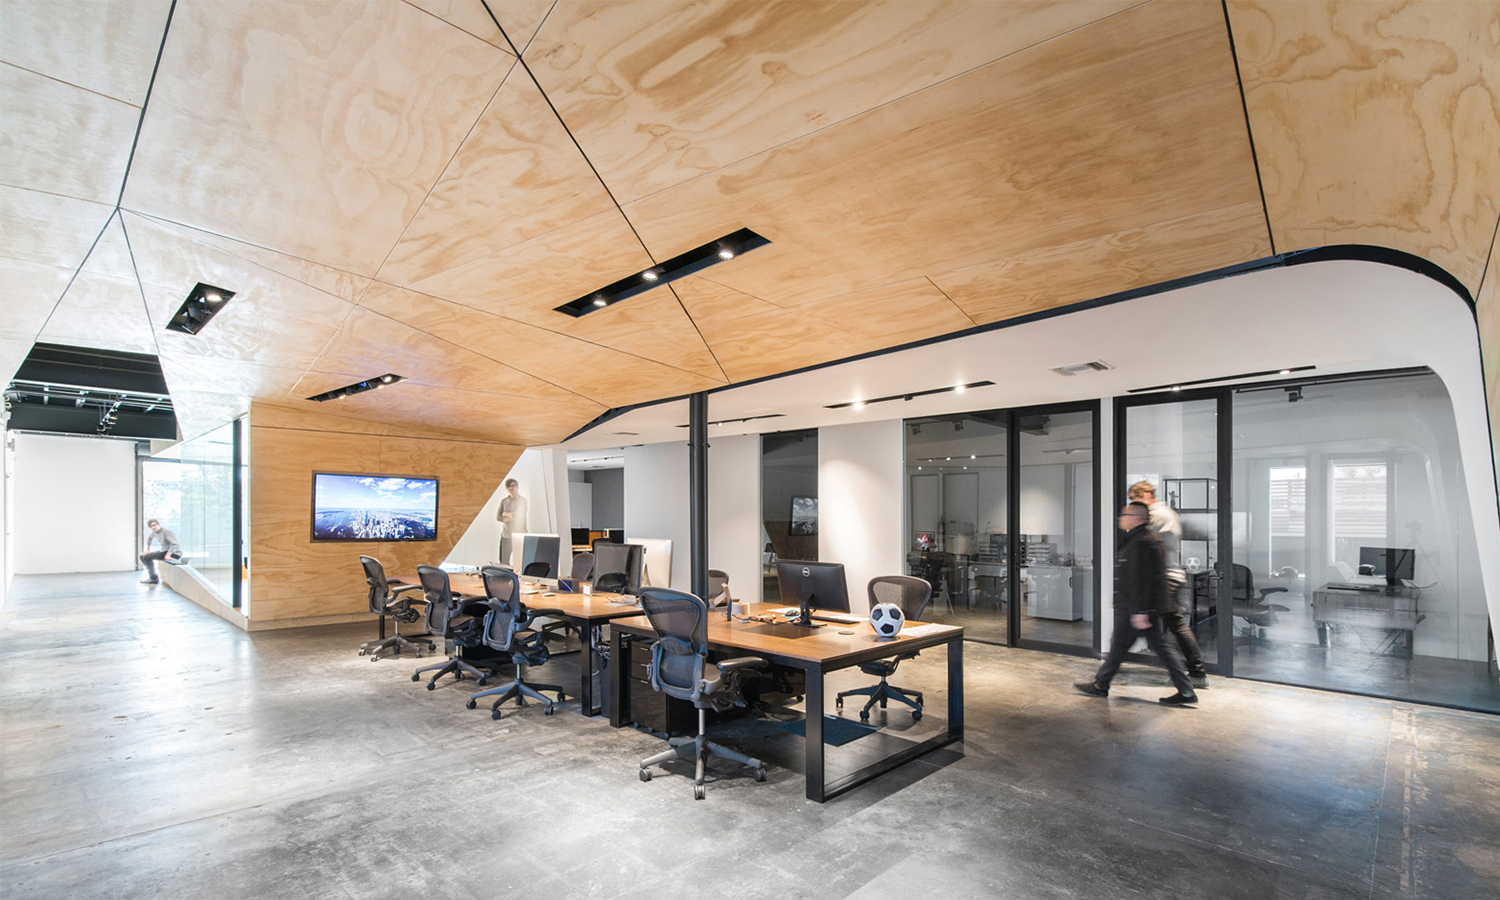 Converted warehouse office by Domaen features sculptural plywood meeting rooms-办公